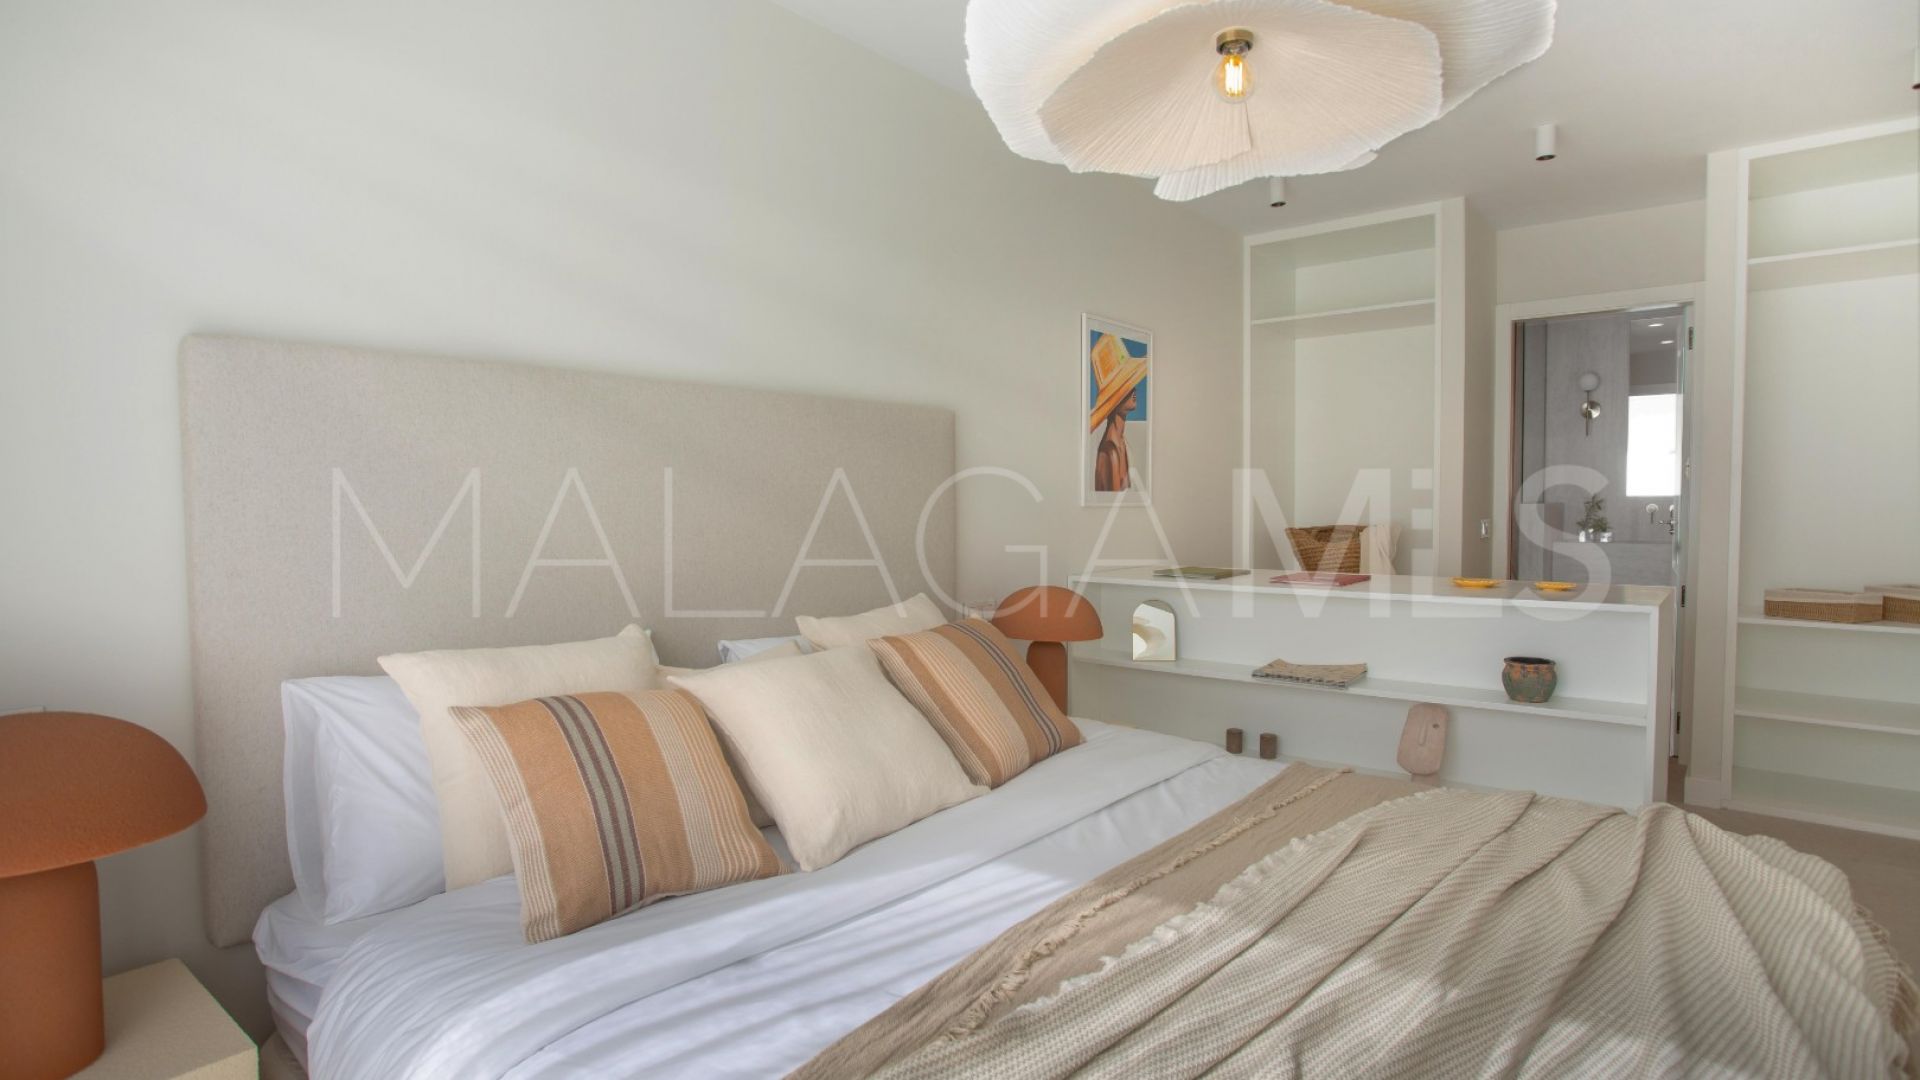 For sale town house in San Pedro Playa